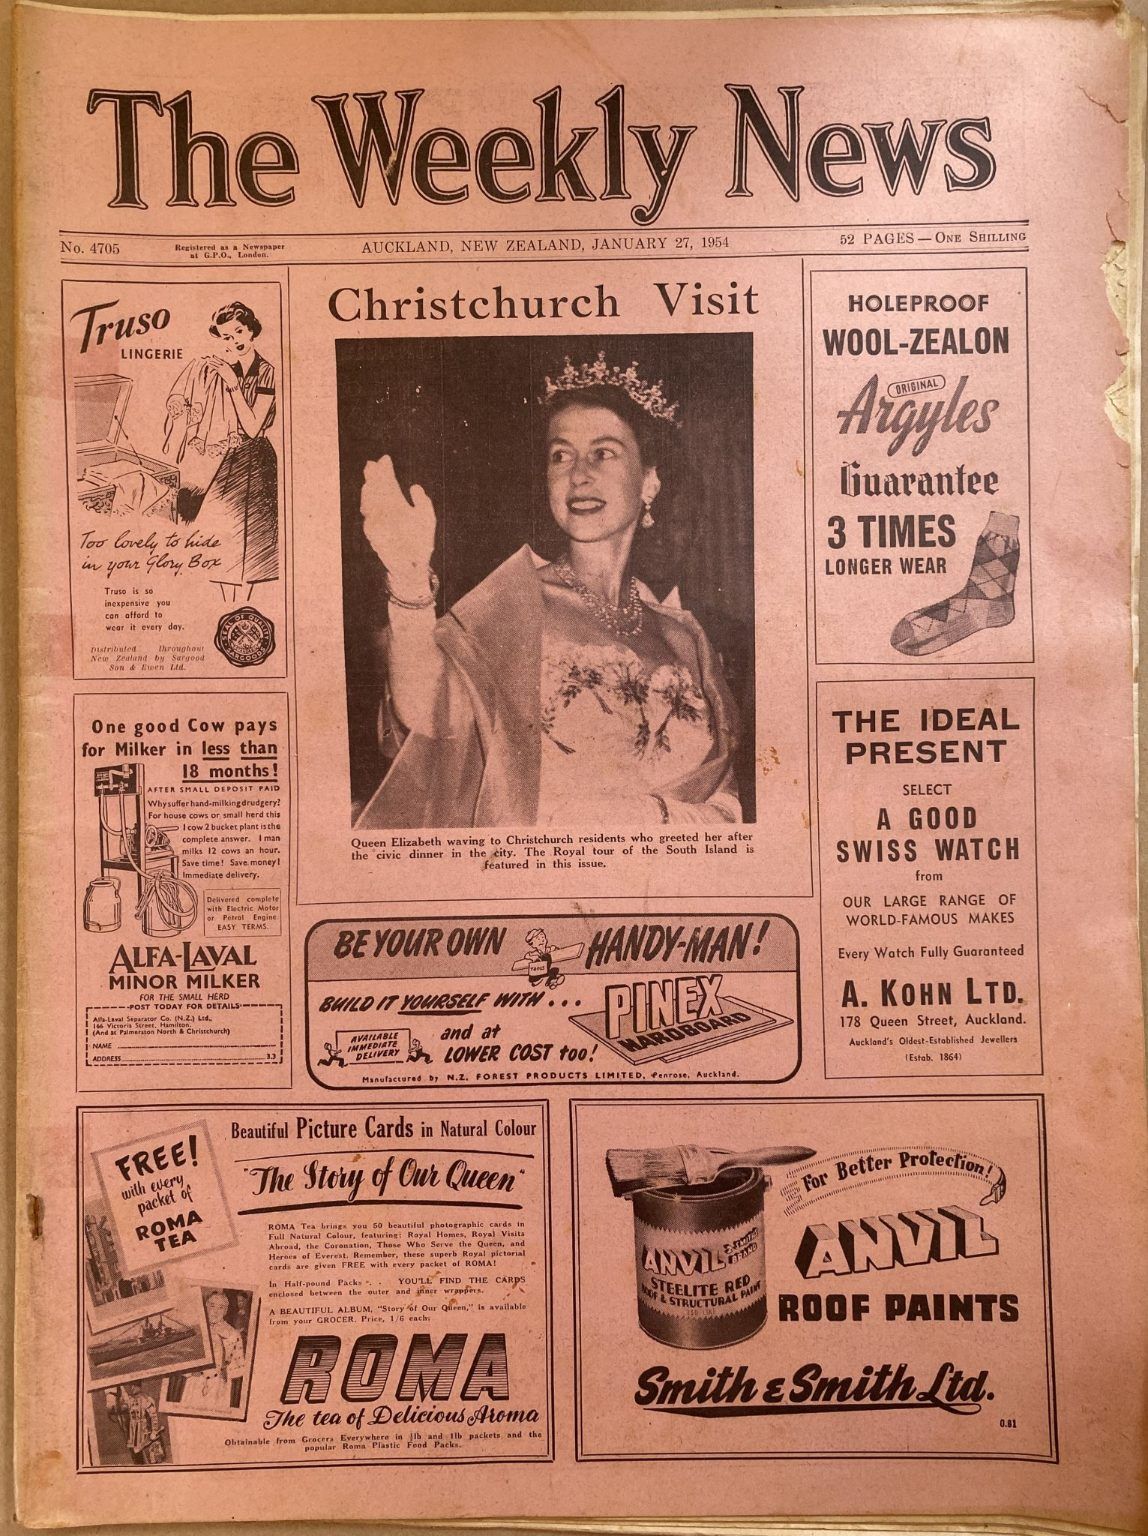 OLD NEWSPAPER: The Weekly News - No. 4705, 27 January 1954